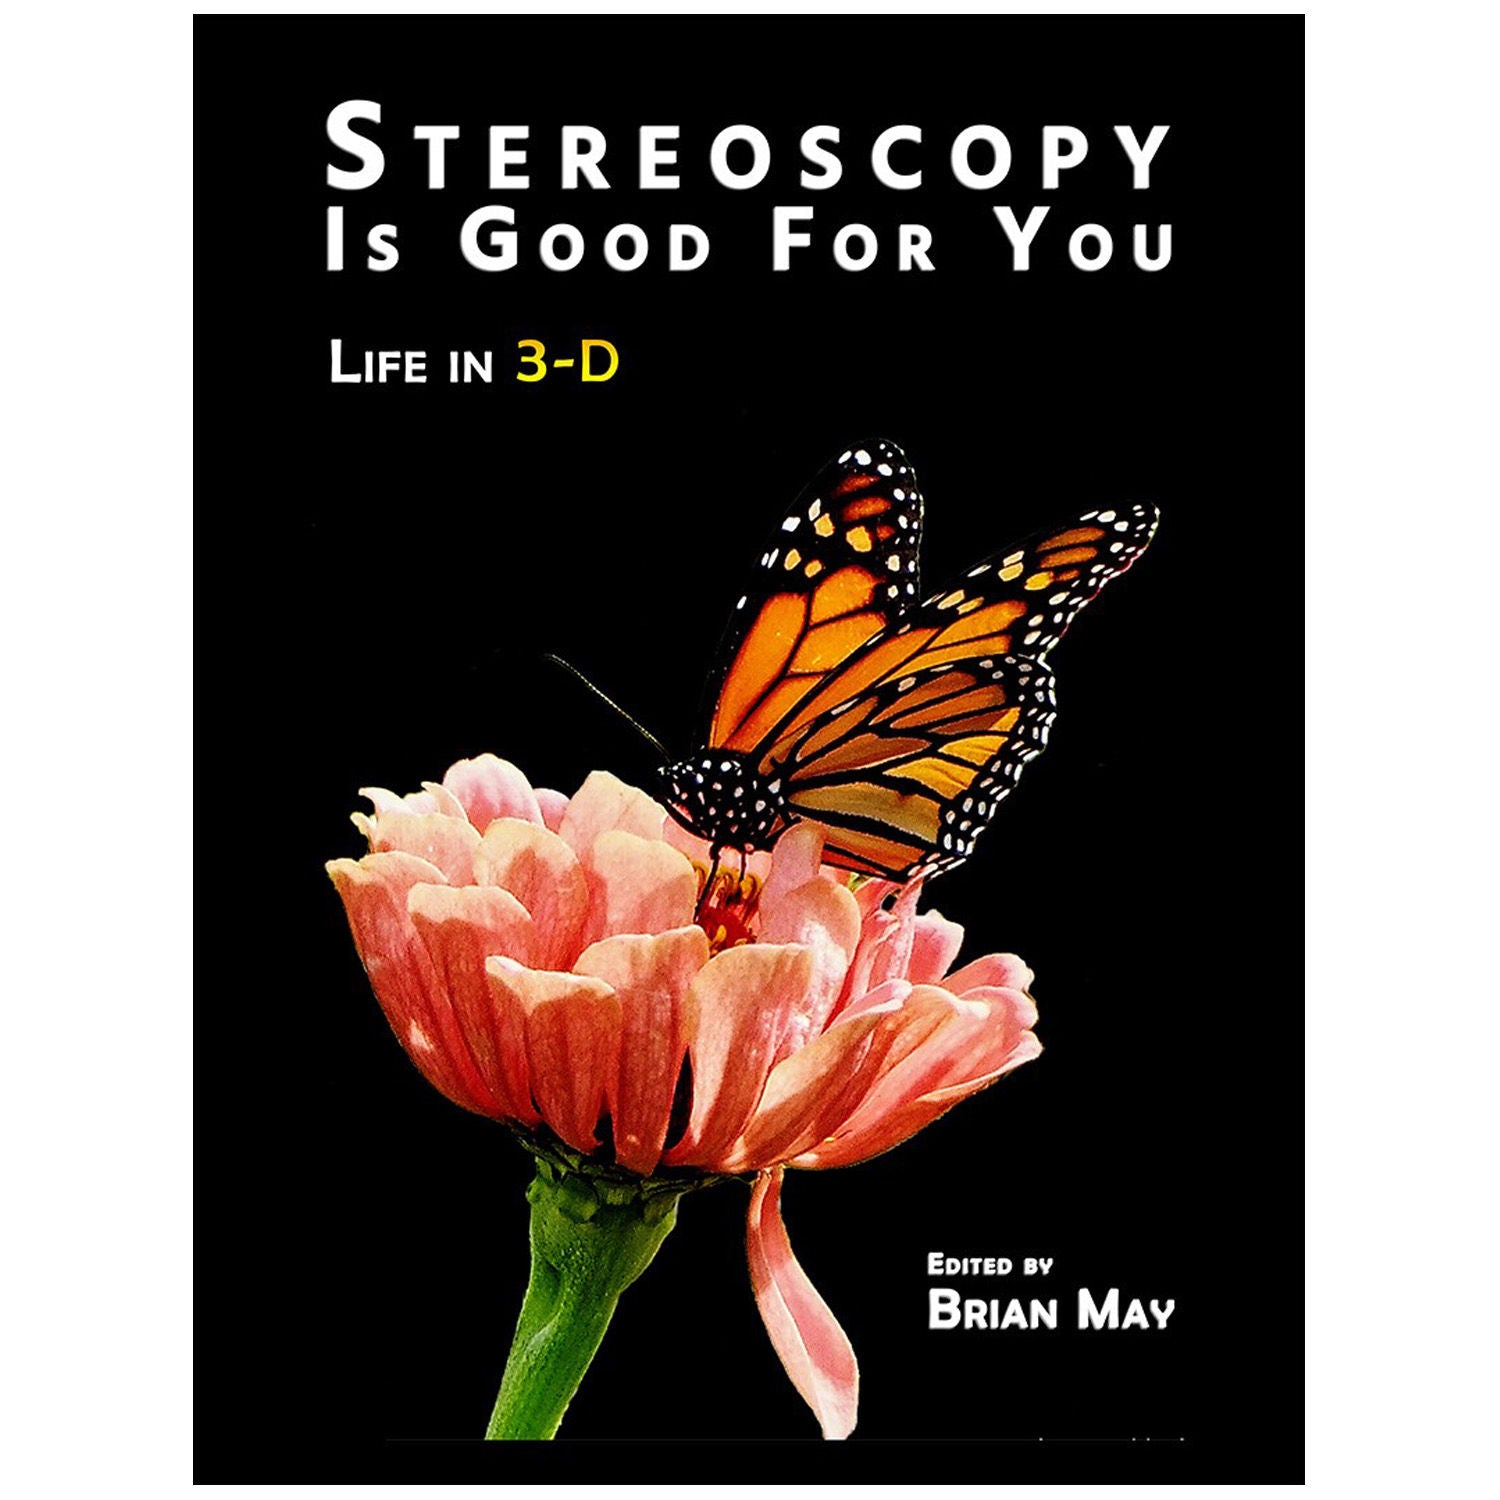 London Stereoscopic Company - Stereoscopy Is Good For You - Life in 3-D